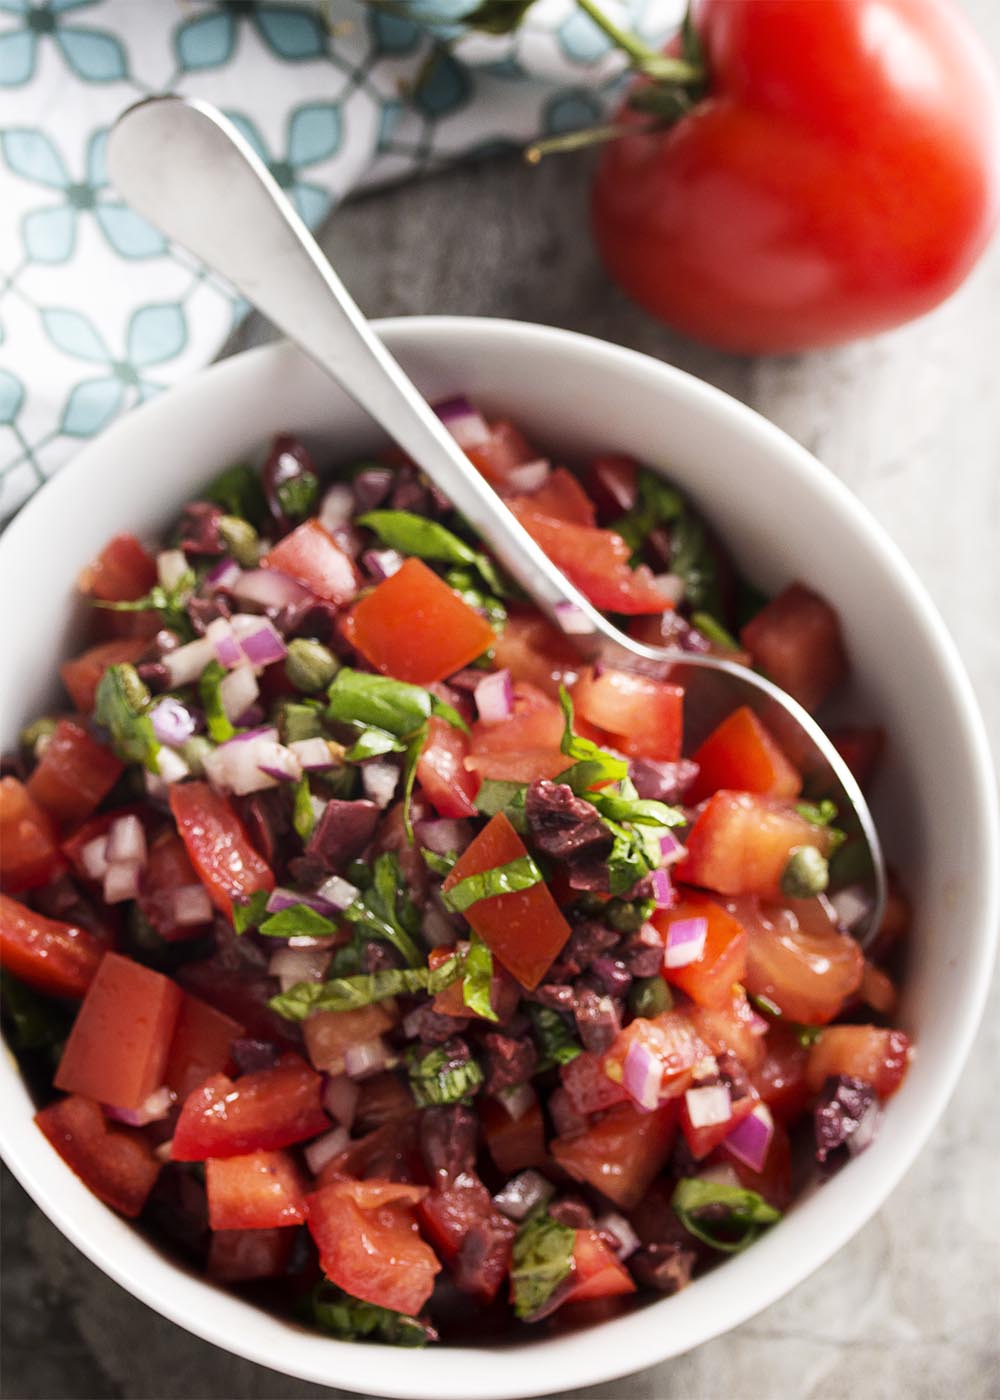 This Italian salsa is full of Italian flavors like fresh tomatoes, capers, black olives, and basil! It's great on grilled meats, bruschetta, or as a dip with chips. | justalittlebitofbacon.com